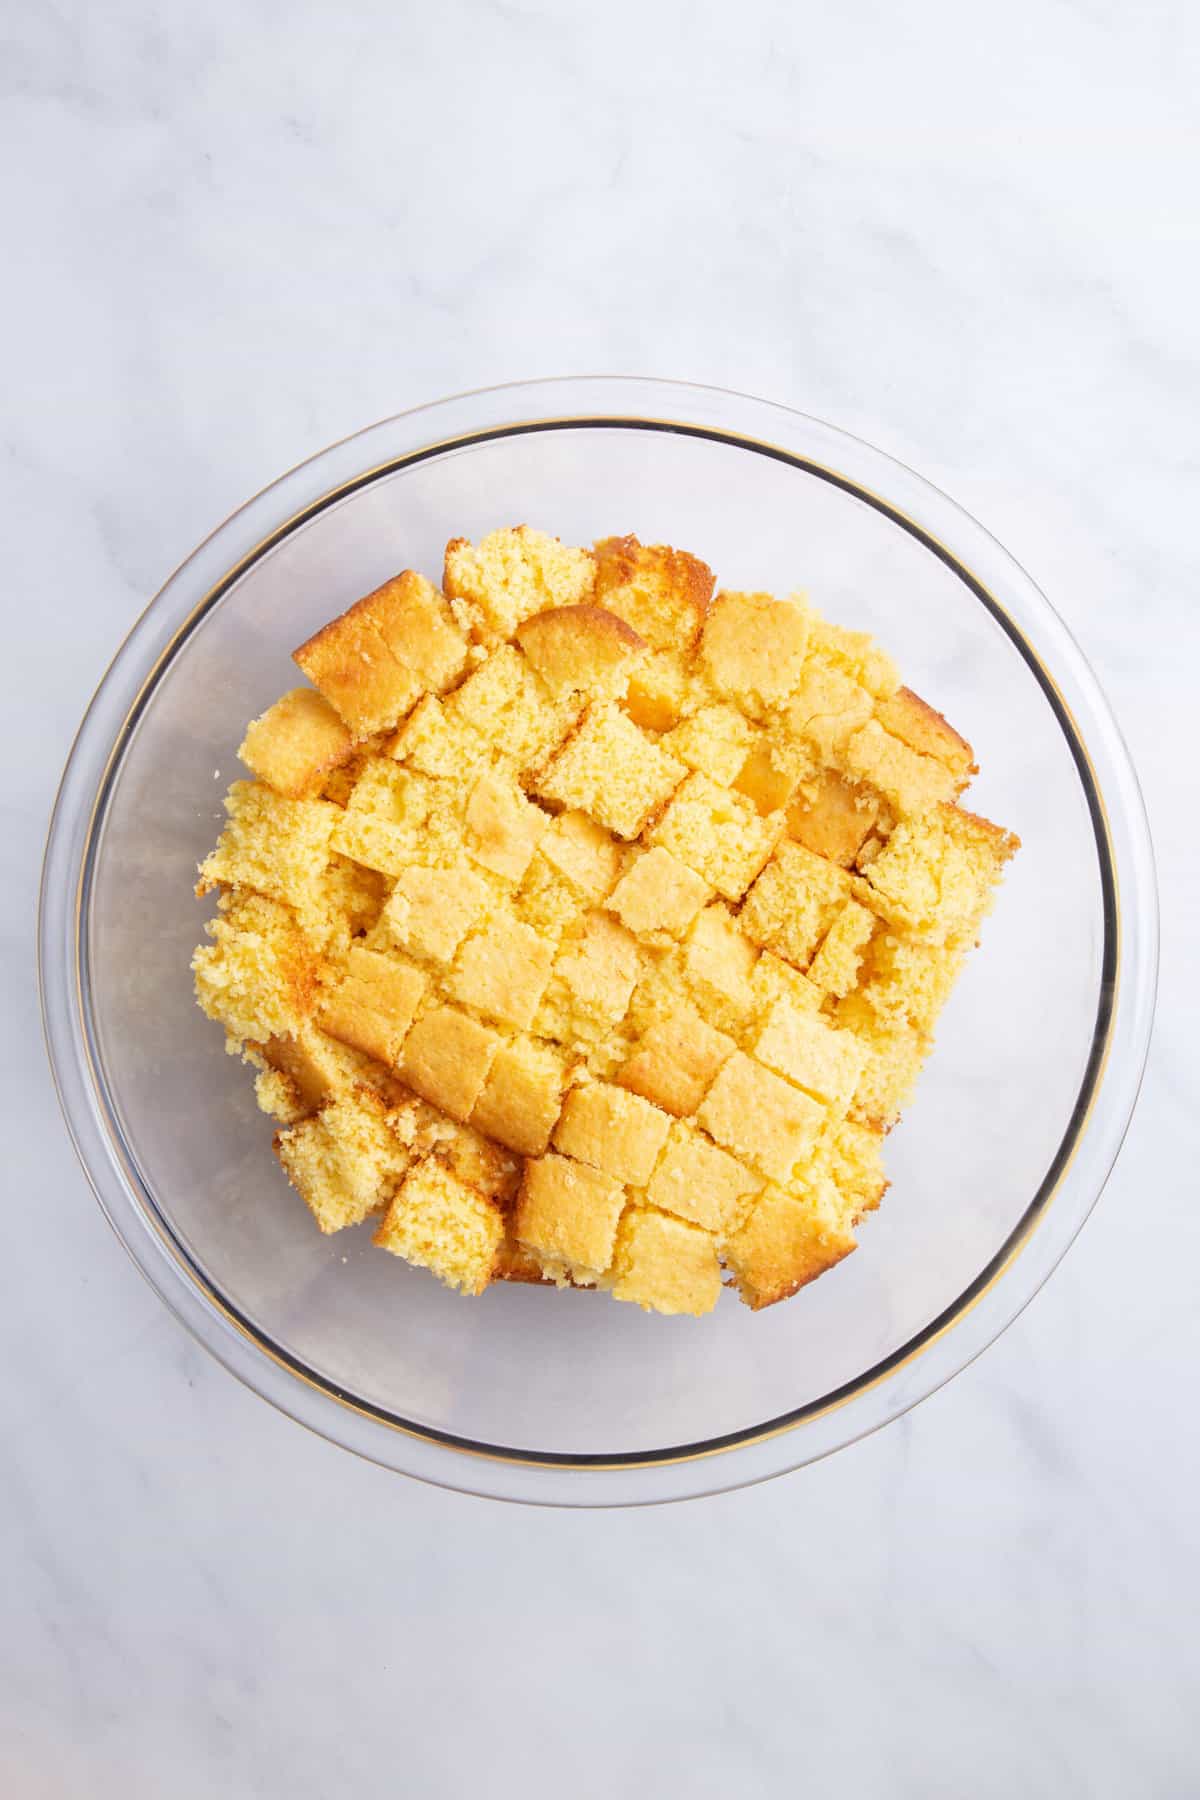 large glass bowl of cubed homemade cornbread.